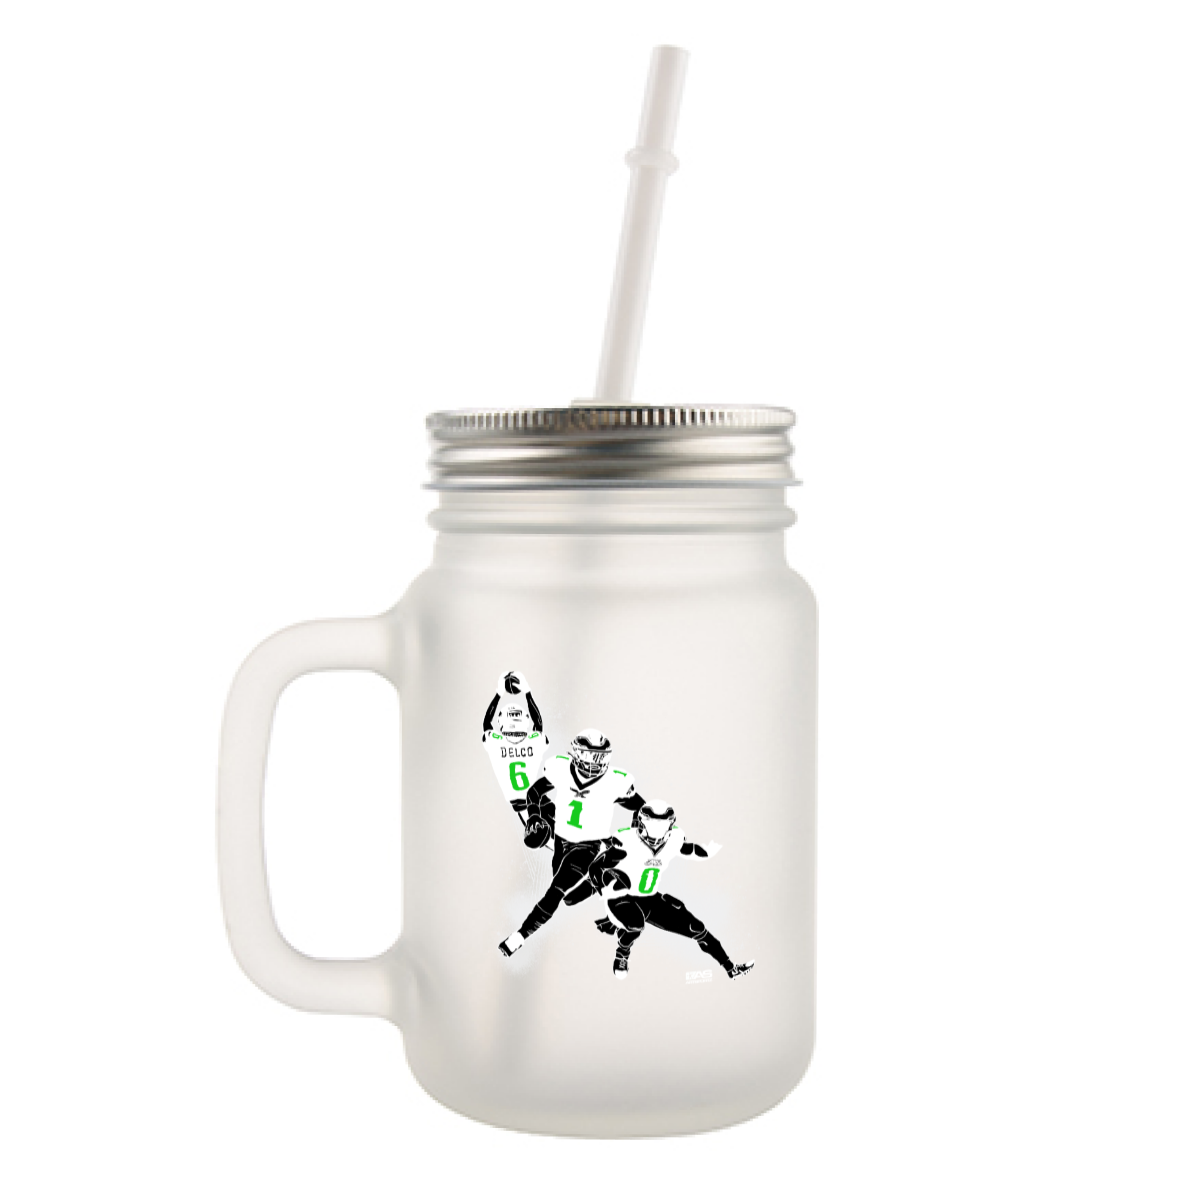 610 Birds Frosted glass mason jar with handle